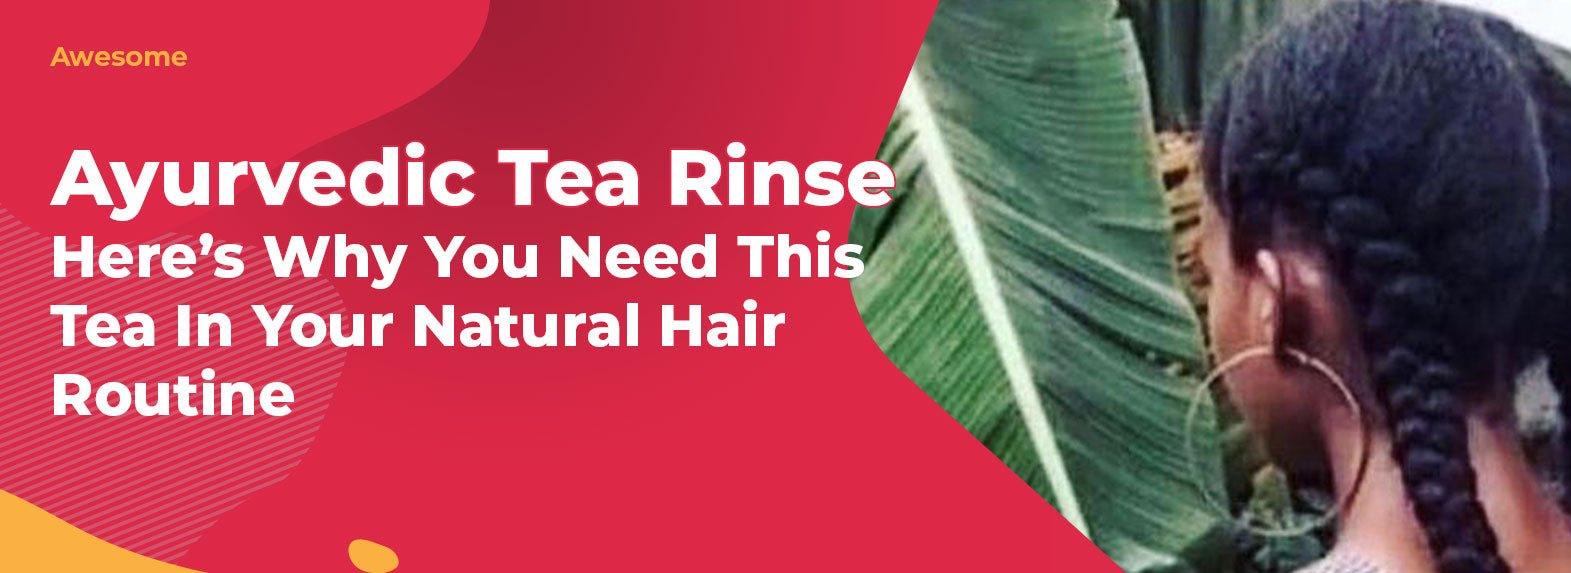 Ayurvedic Tea Rinse - Here’s Why You Need This Tea In Your Natural Hair Routine! - GlammedNaturallyOil